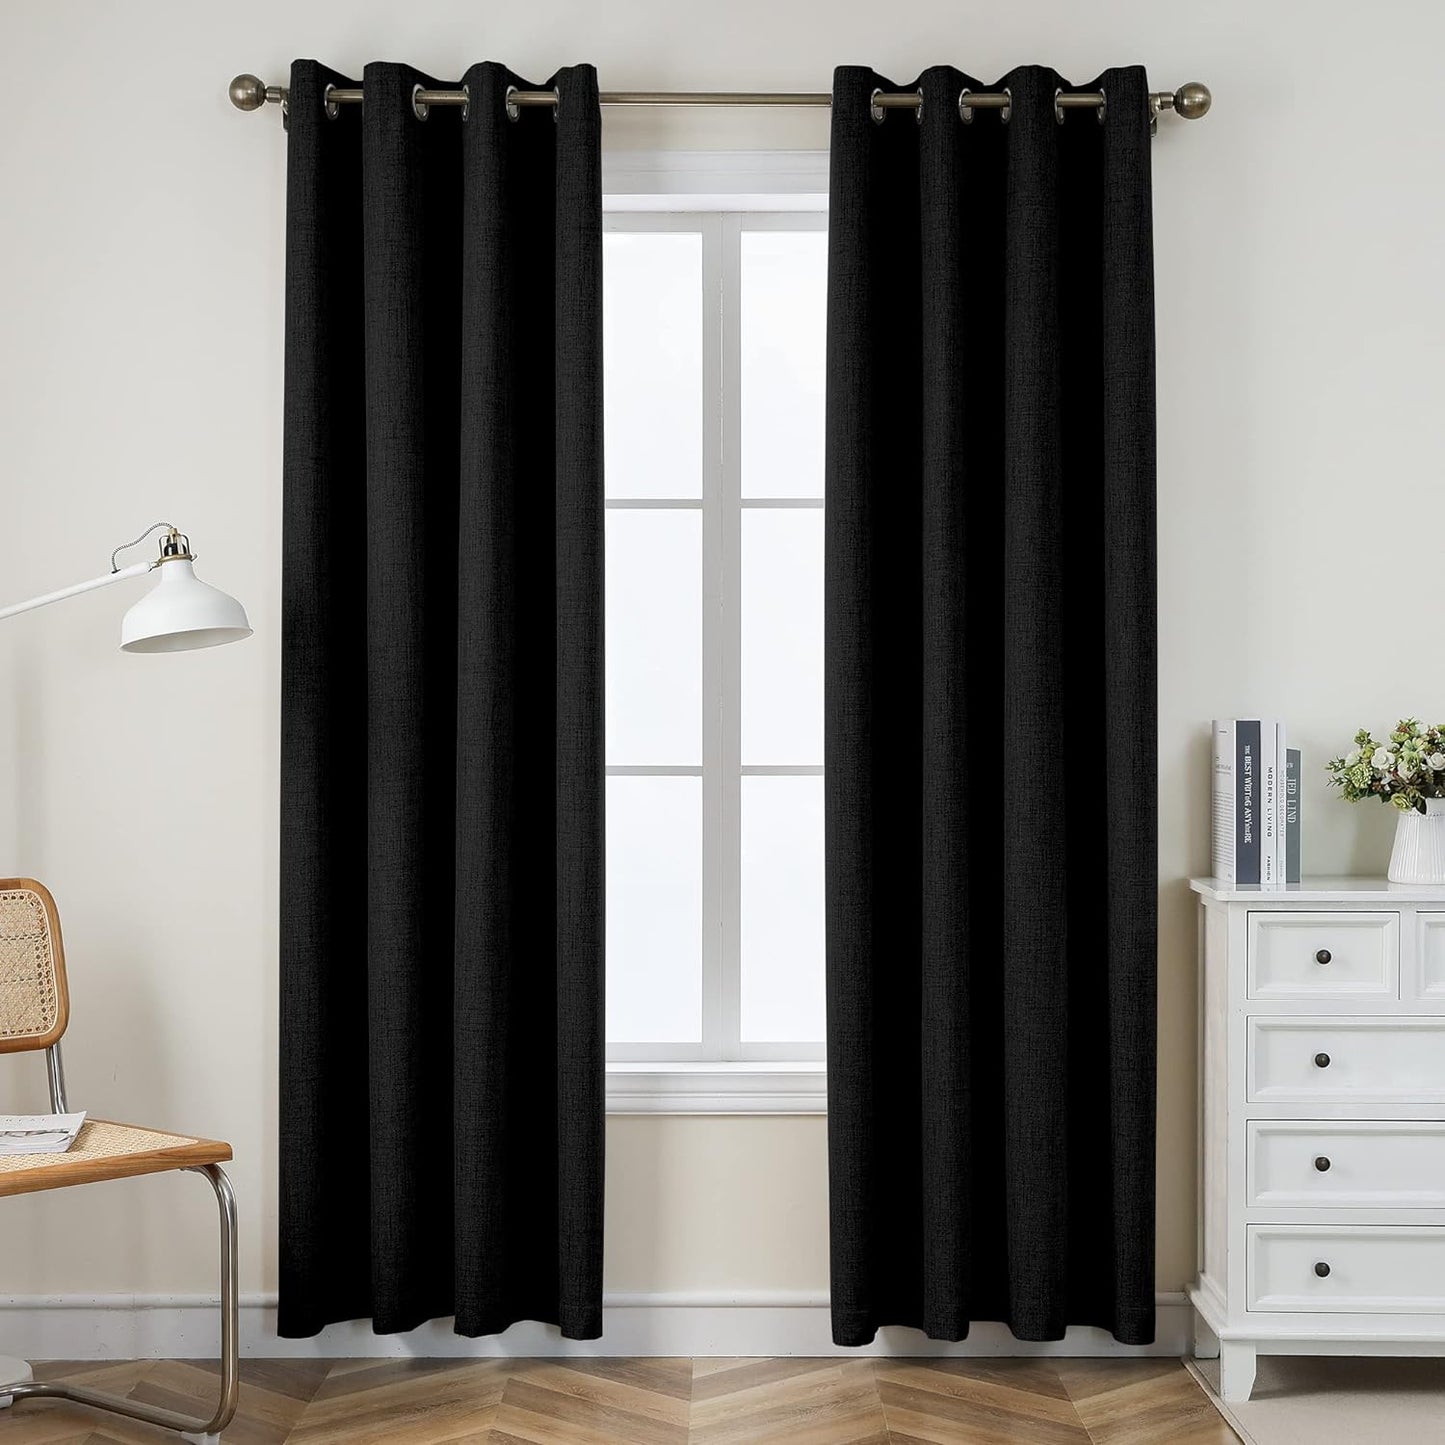 CUCRAF Full Blackout Window Curtains 84 Inches Long,Faux Linen Look Thermal Insulated Grommet Drapes Panels for Bedroom Living Room,Set of 2(52 X 84 Inches, Light Khaki)  CUCRAF Black 52 X 108 Inches 